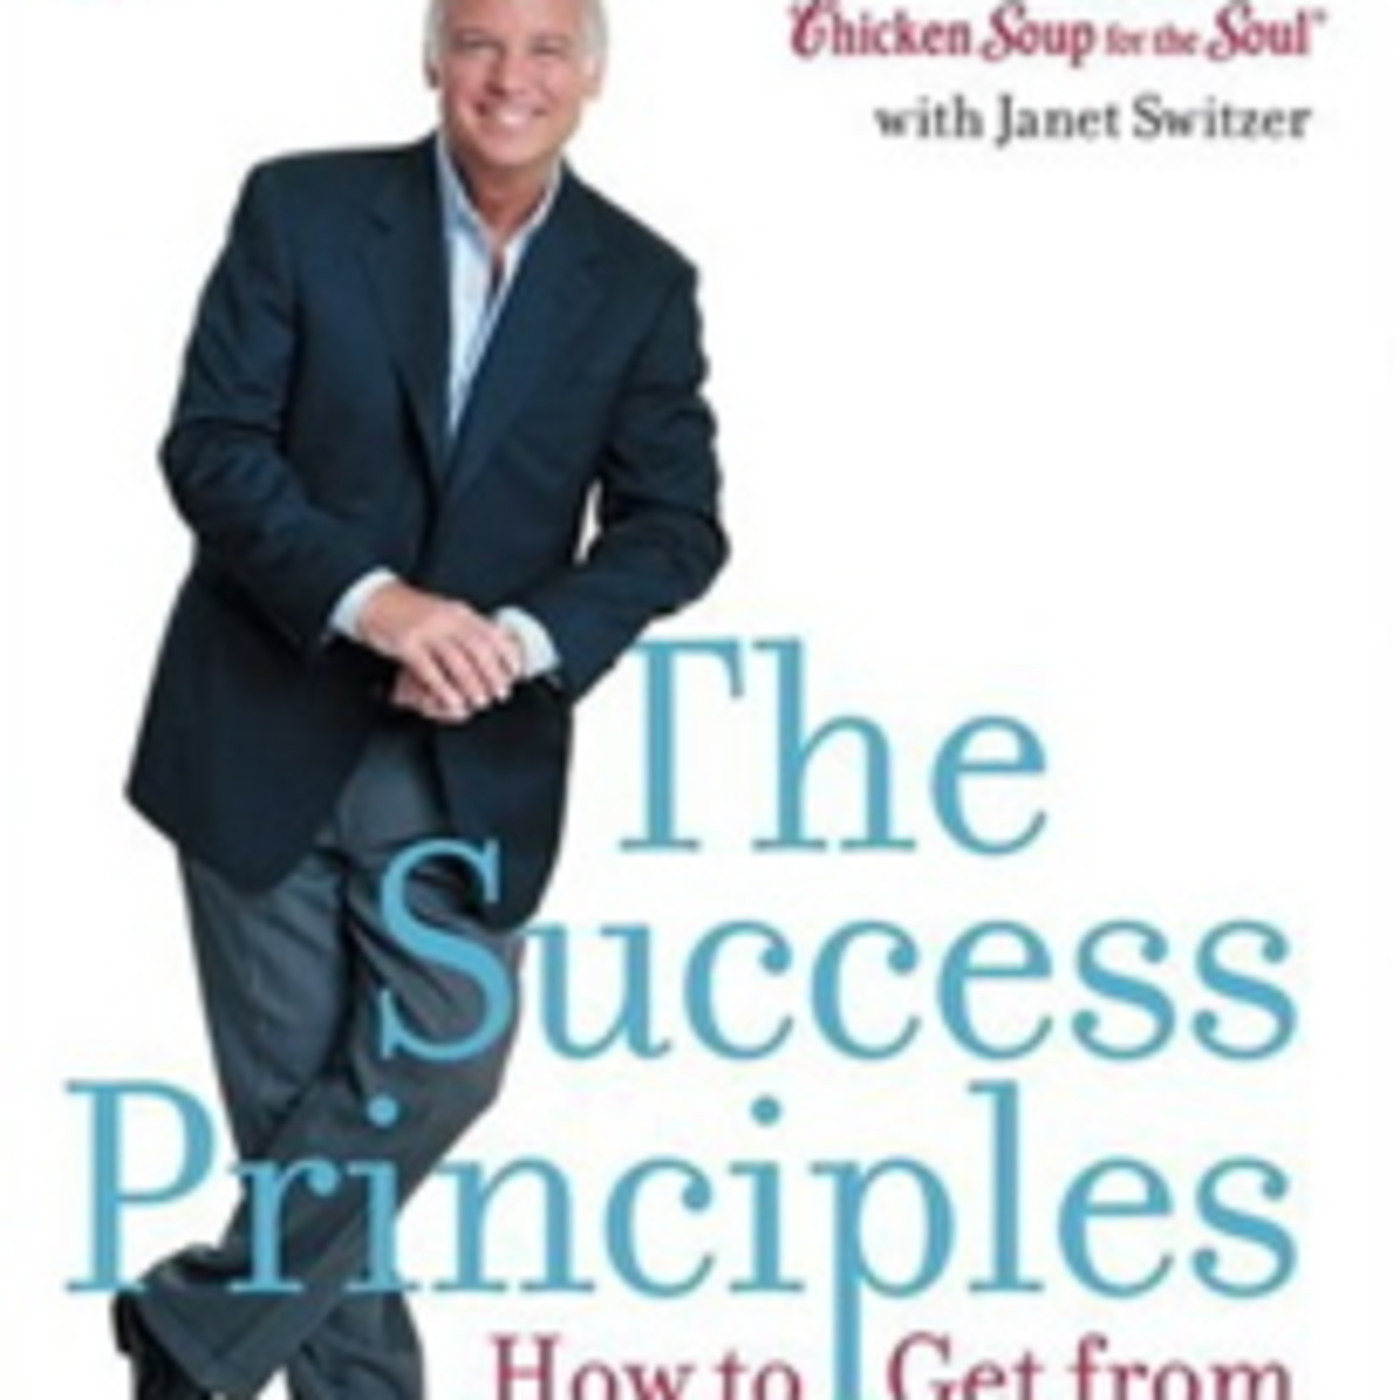 Q&A: JACK CANFIELD, Author